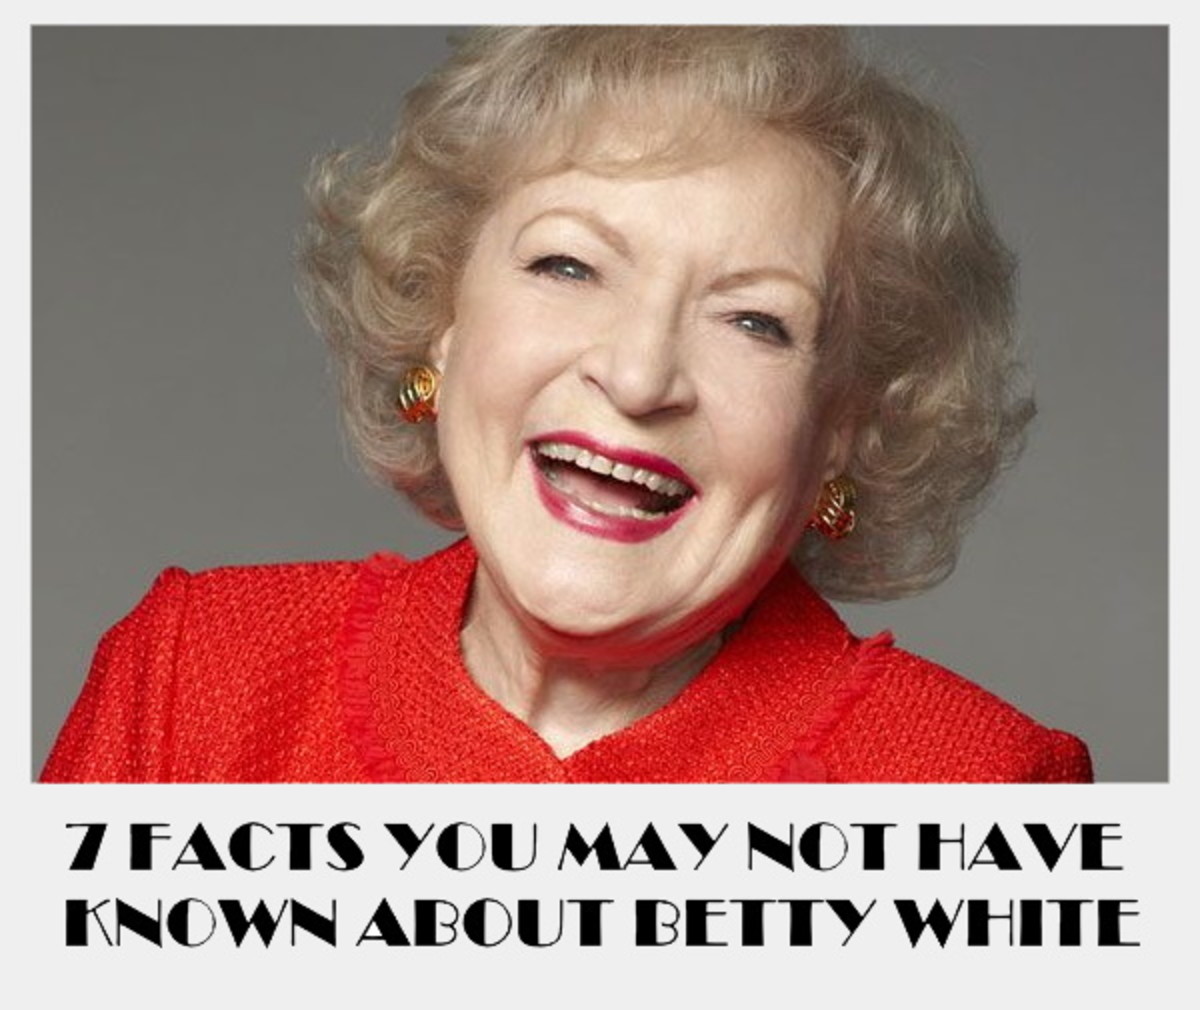 At the time of her death, Betty White held the world record for being the woman with the longest career in television.